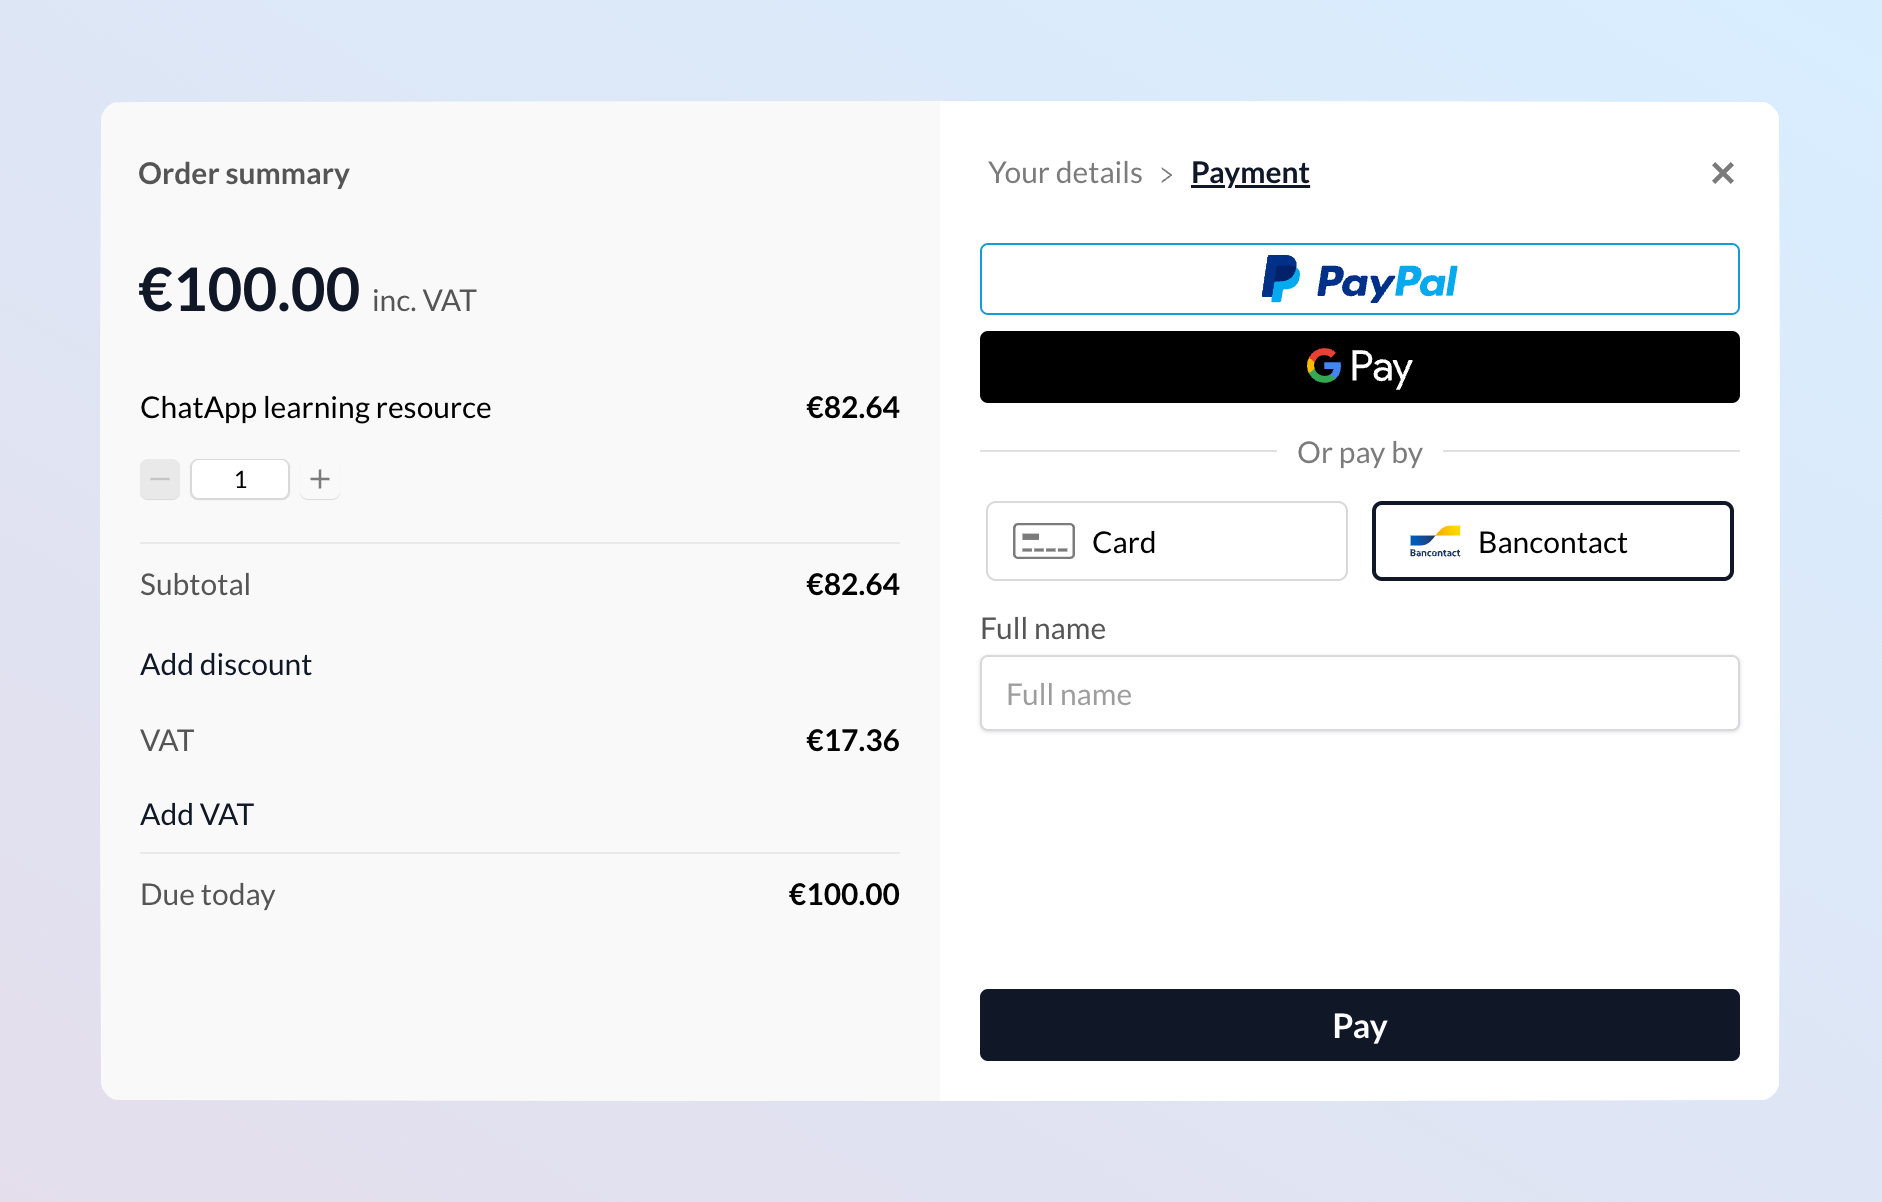 Screenshot showing overlay checkout on the payment method screen. A Bancontact button is visible and selected. There's a field to enter the full name for the Bancontact account holder.